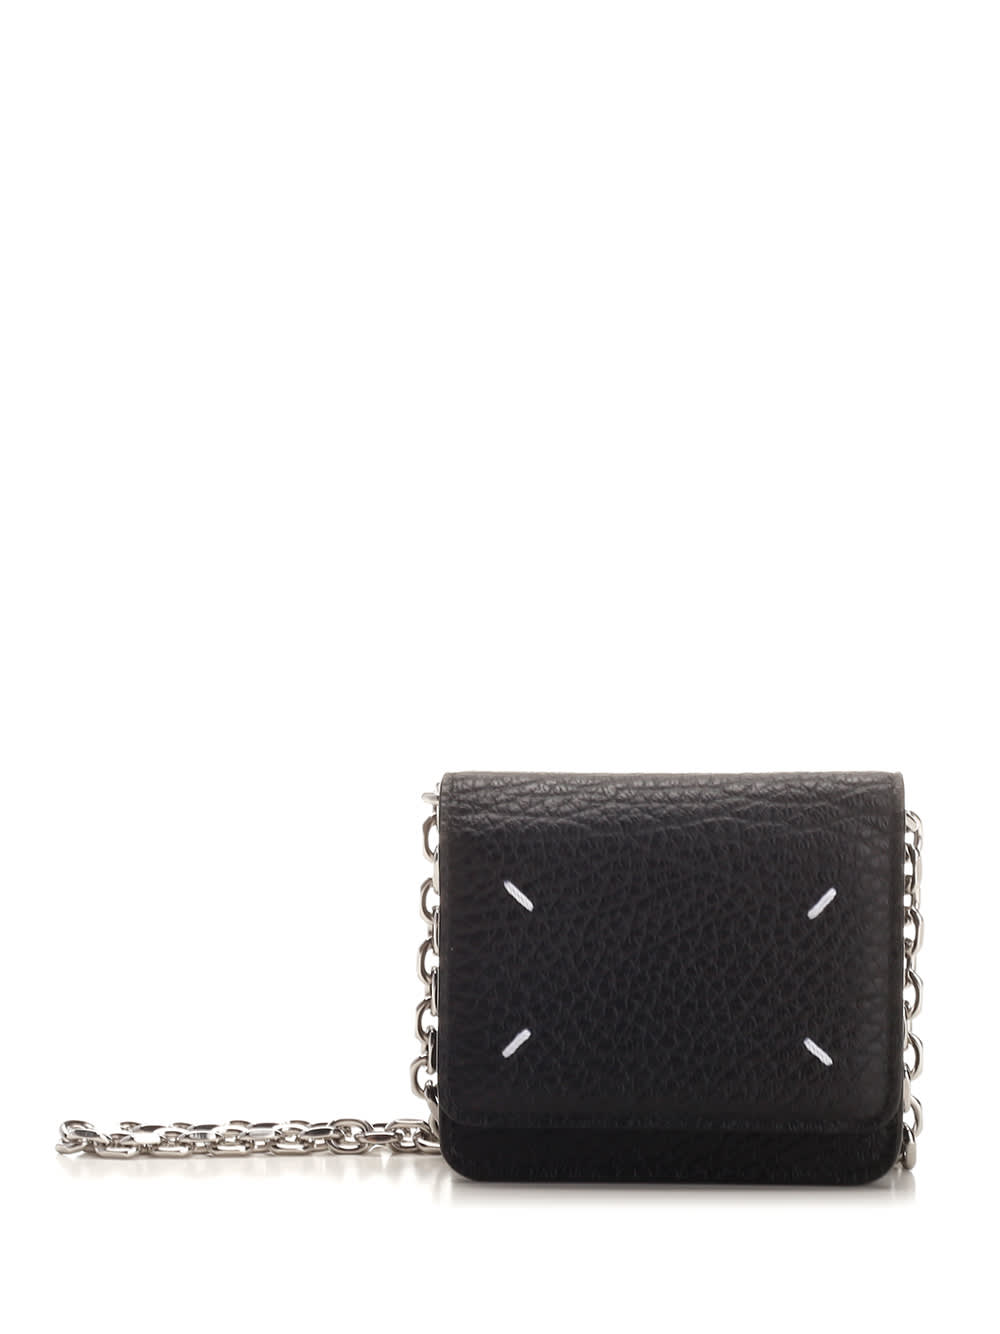 Maison Margiela Small Wallet With Chain Shoulder Strap In Black